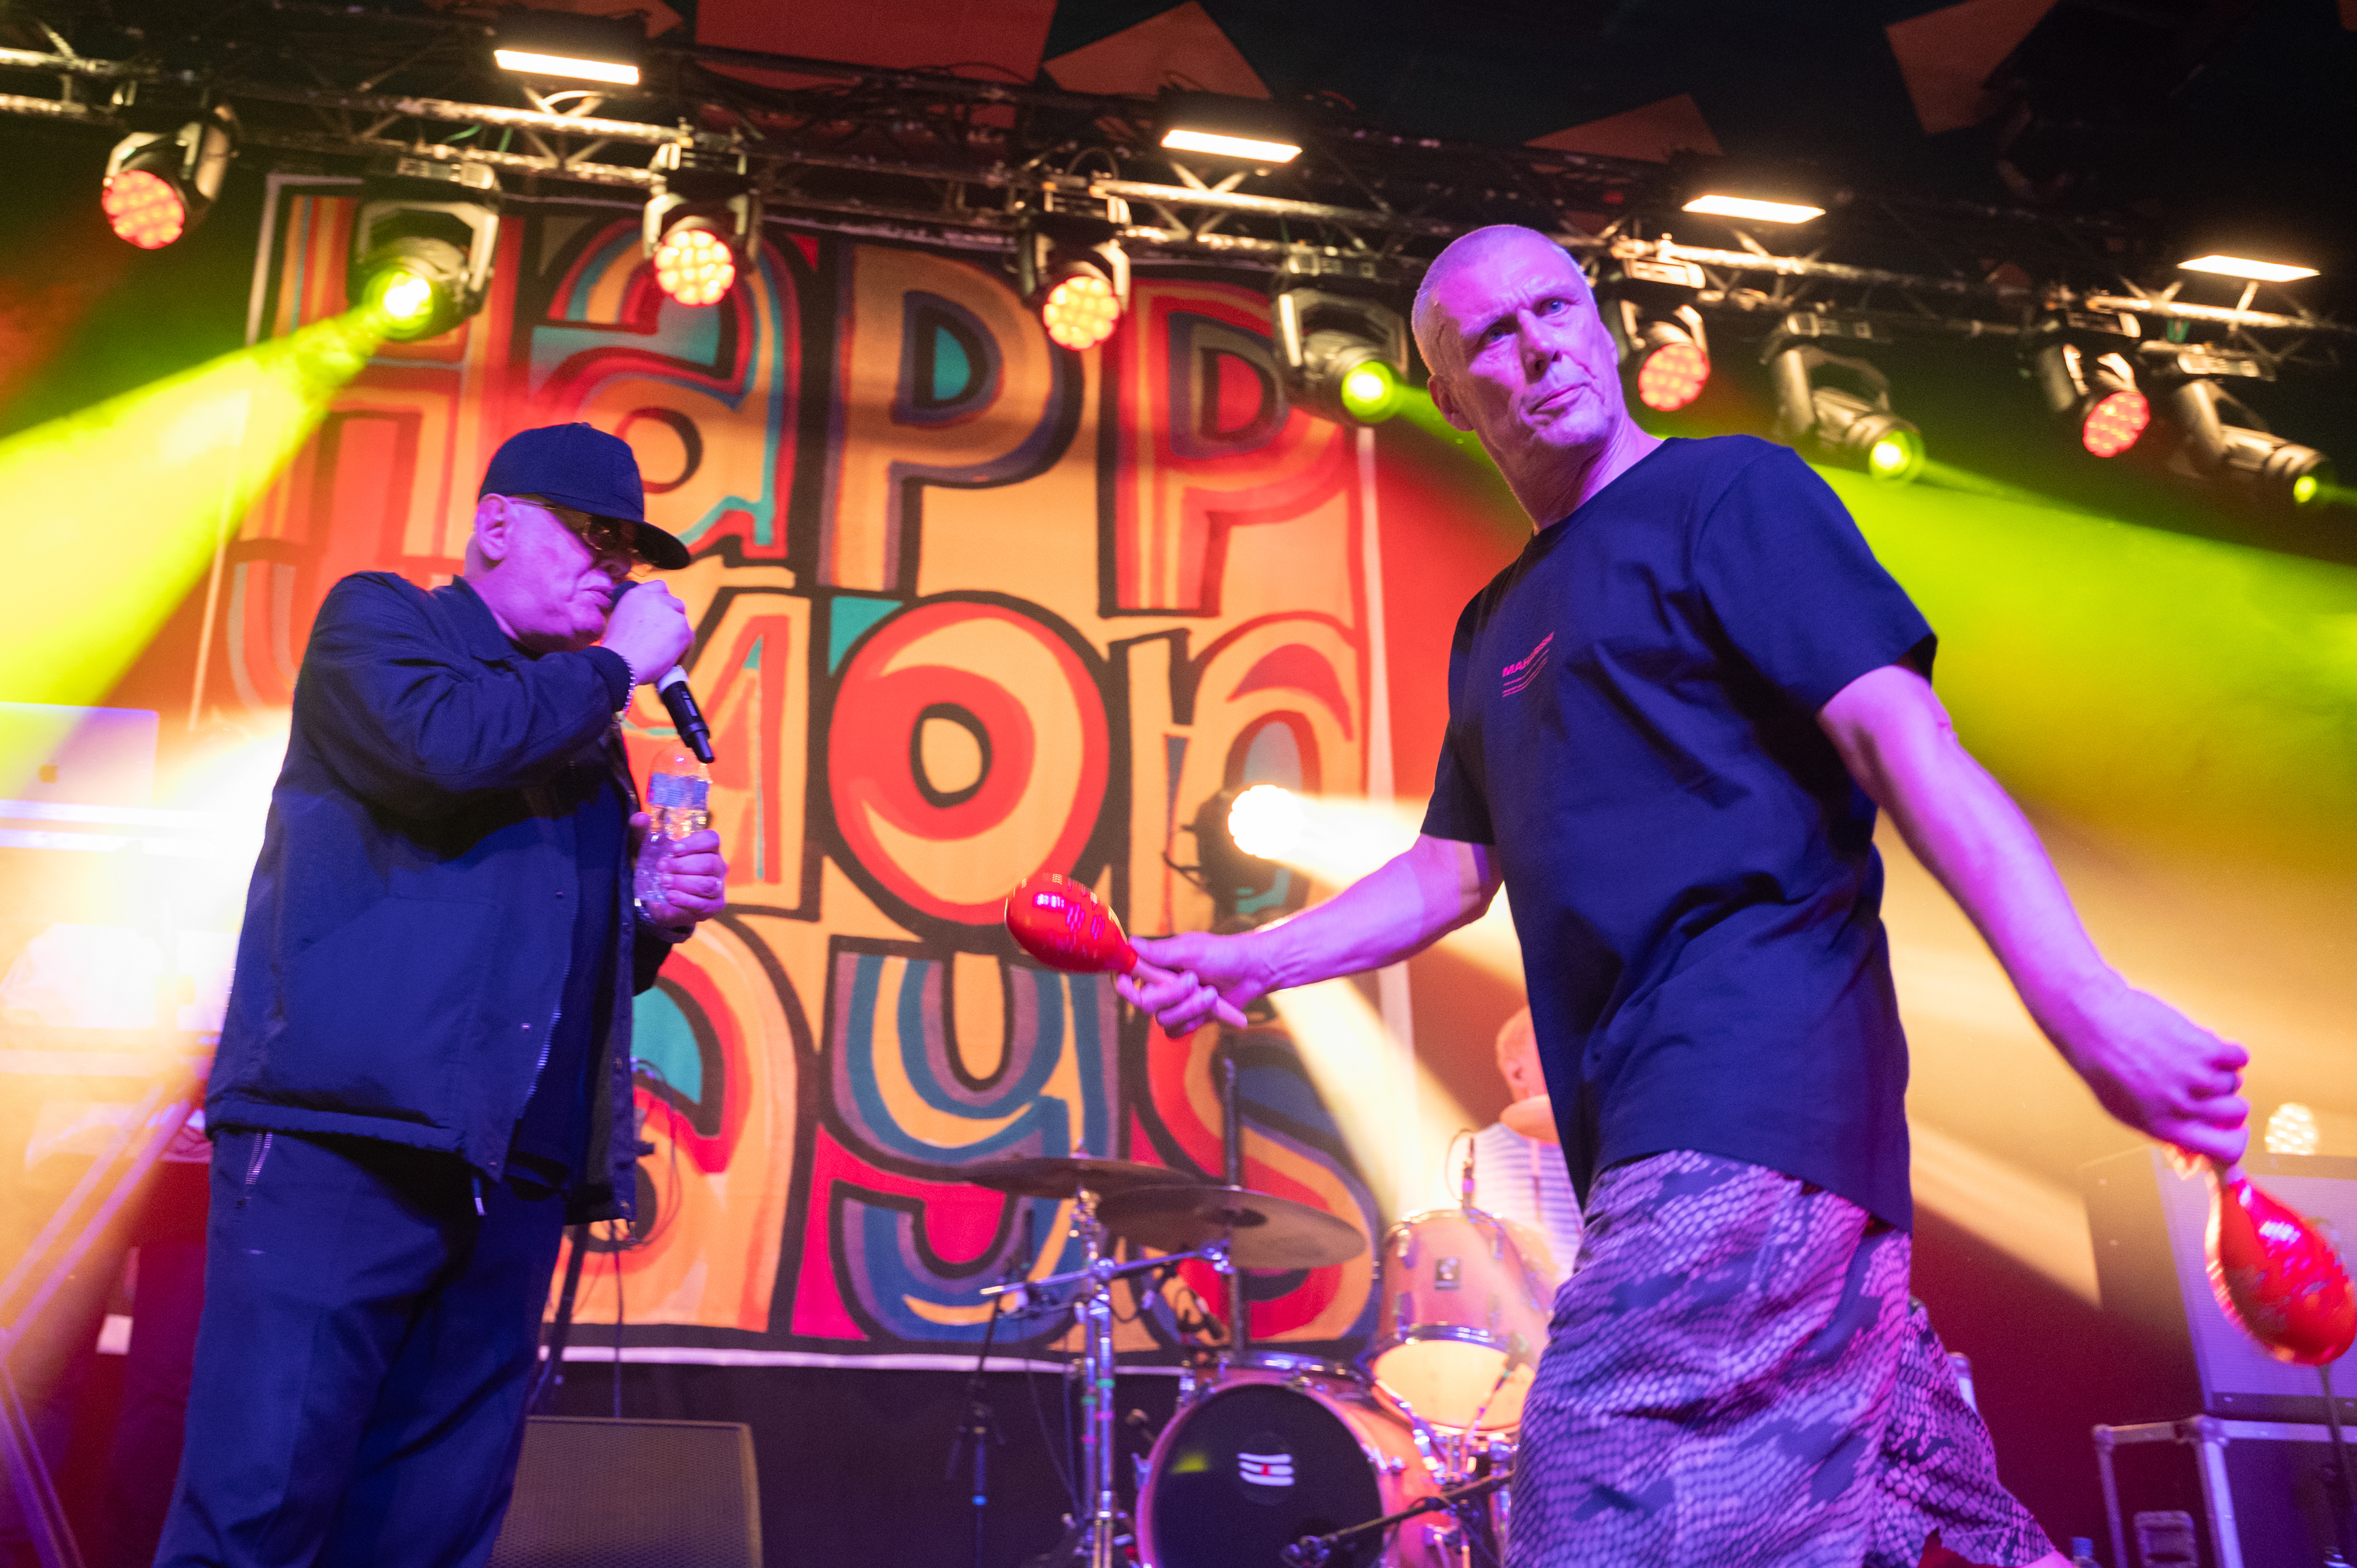 The Happy Mondays have opened the English leg of their tour after two Glasgow dates